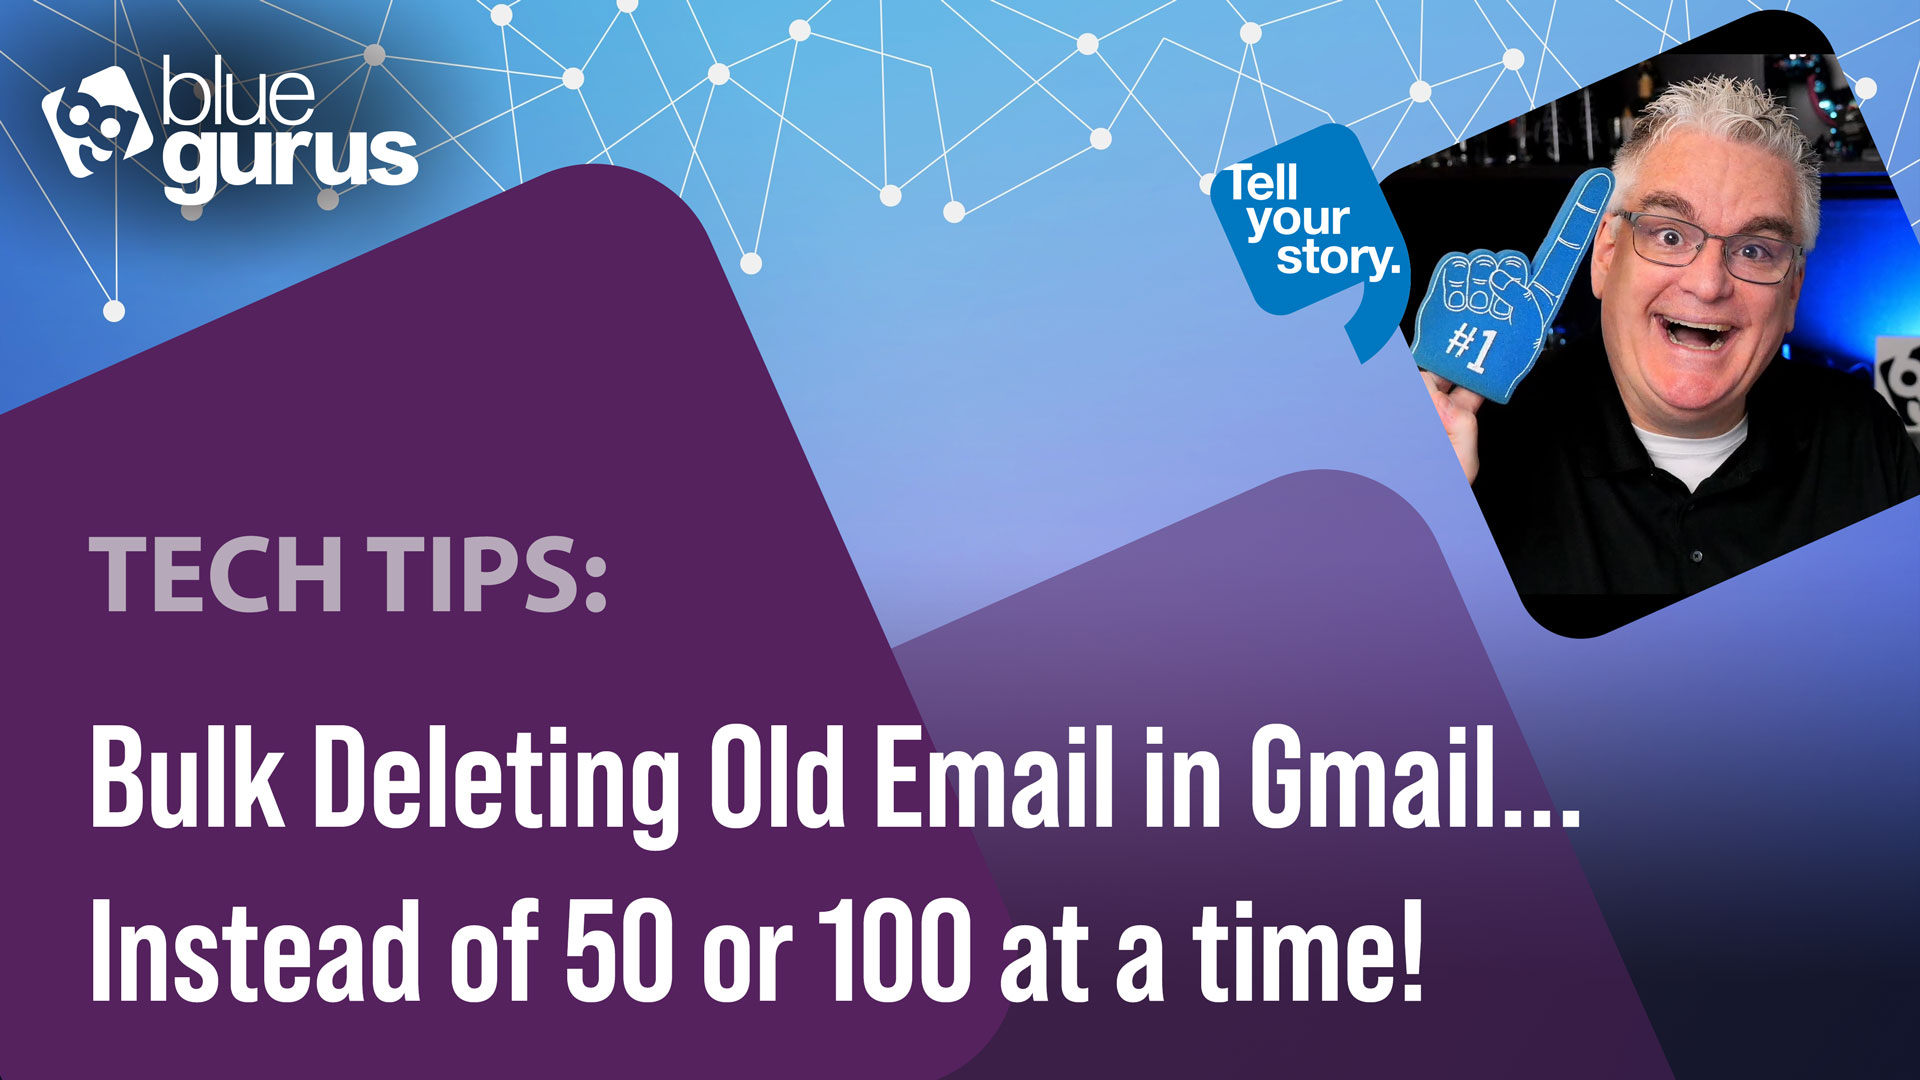 Tech Tips: Bulk Deleting Old Email in Gmail… Instead of 50 or 100 at a time!